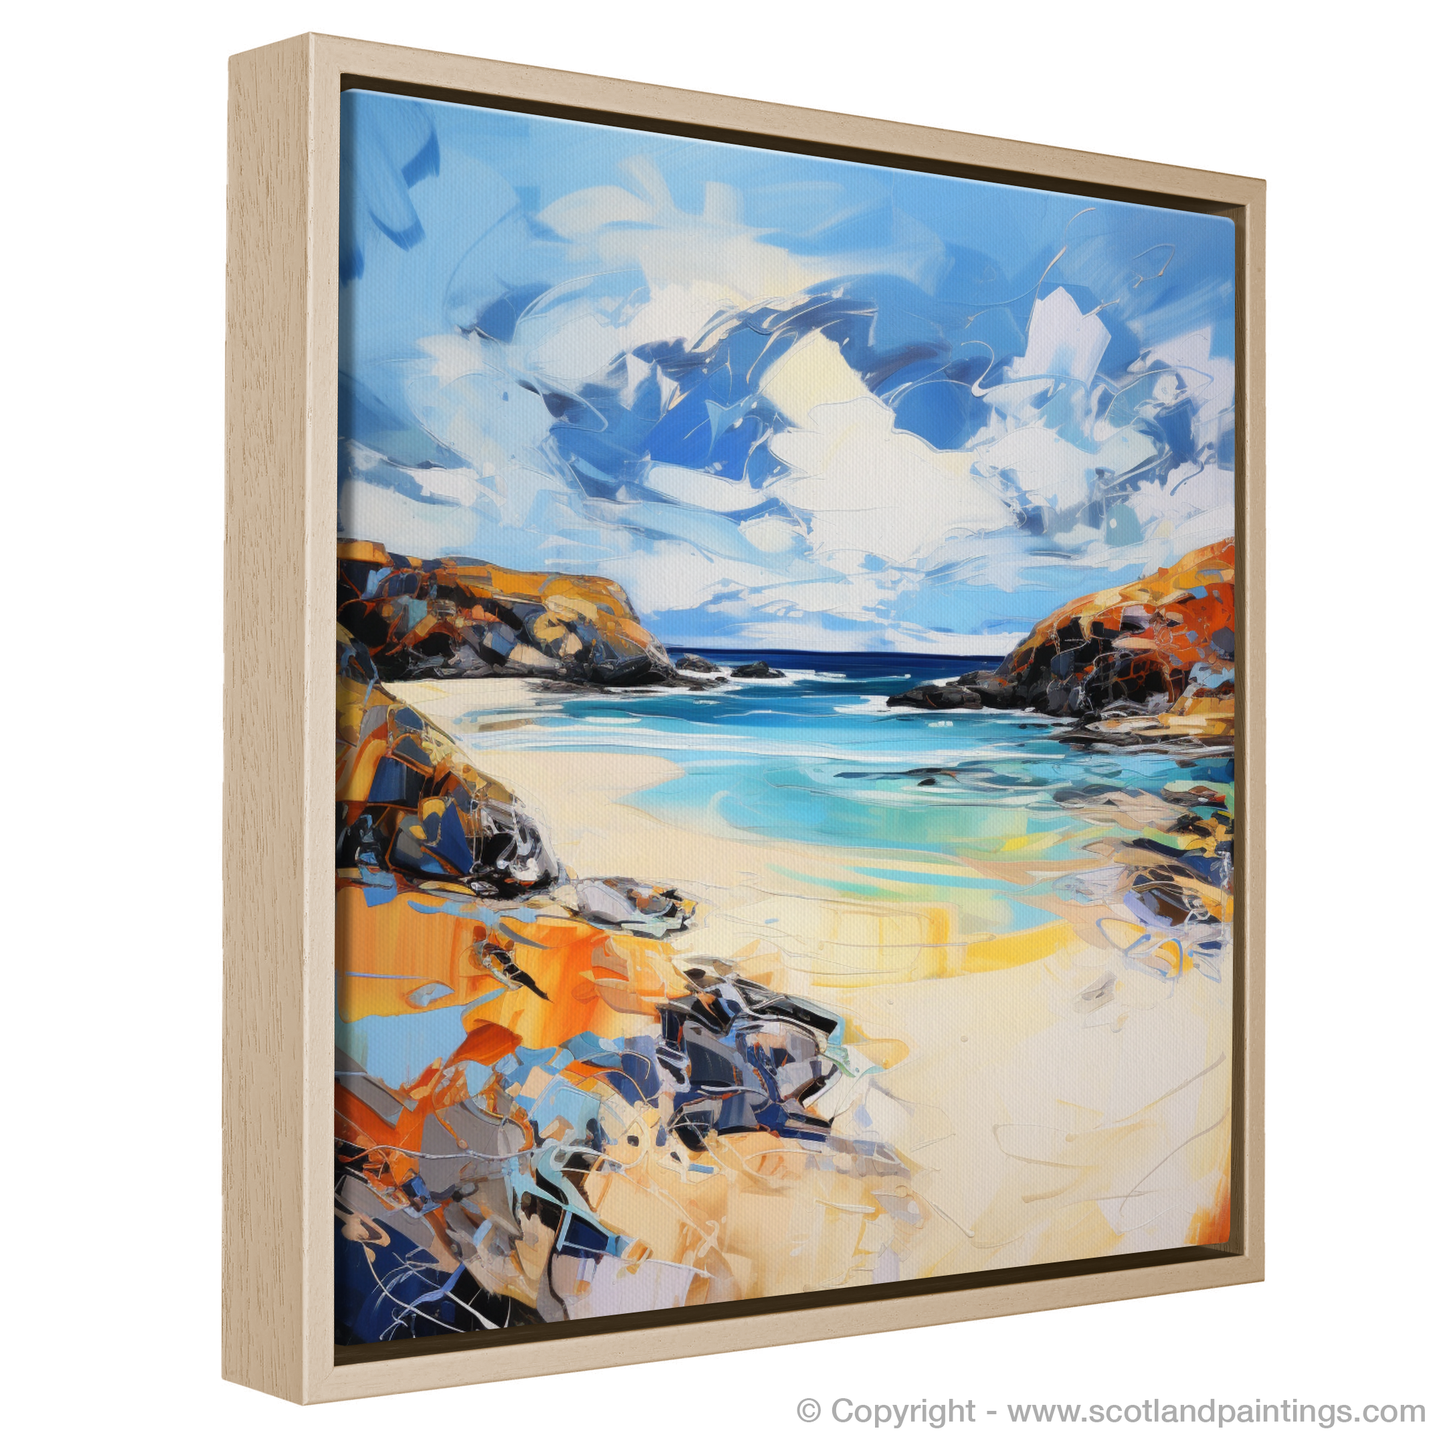 Painting and Art Print of Balnakeil Bay, Durness, Sutherland entitled "Expressionist Ode to Balnakeil Bay".